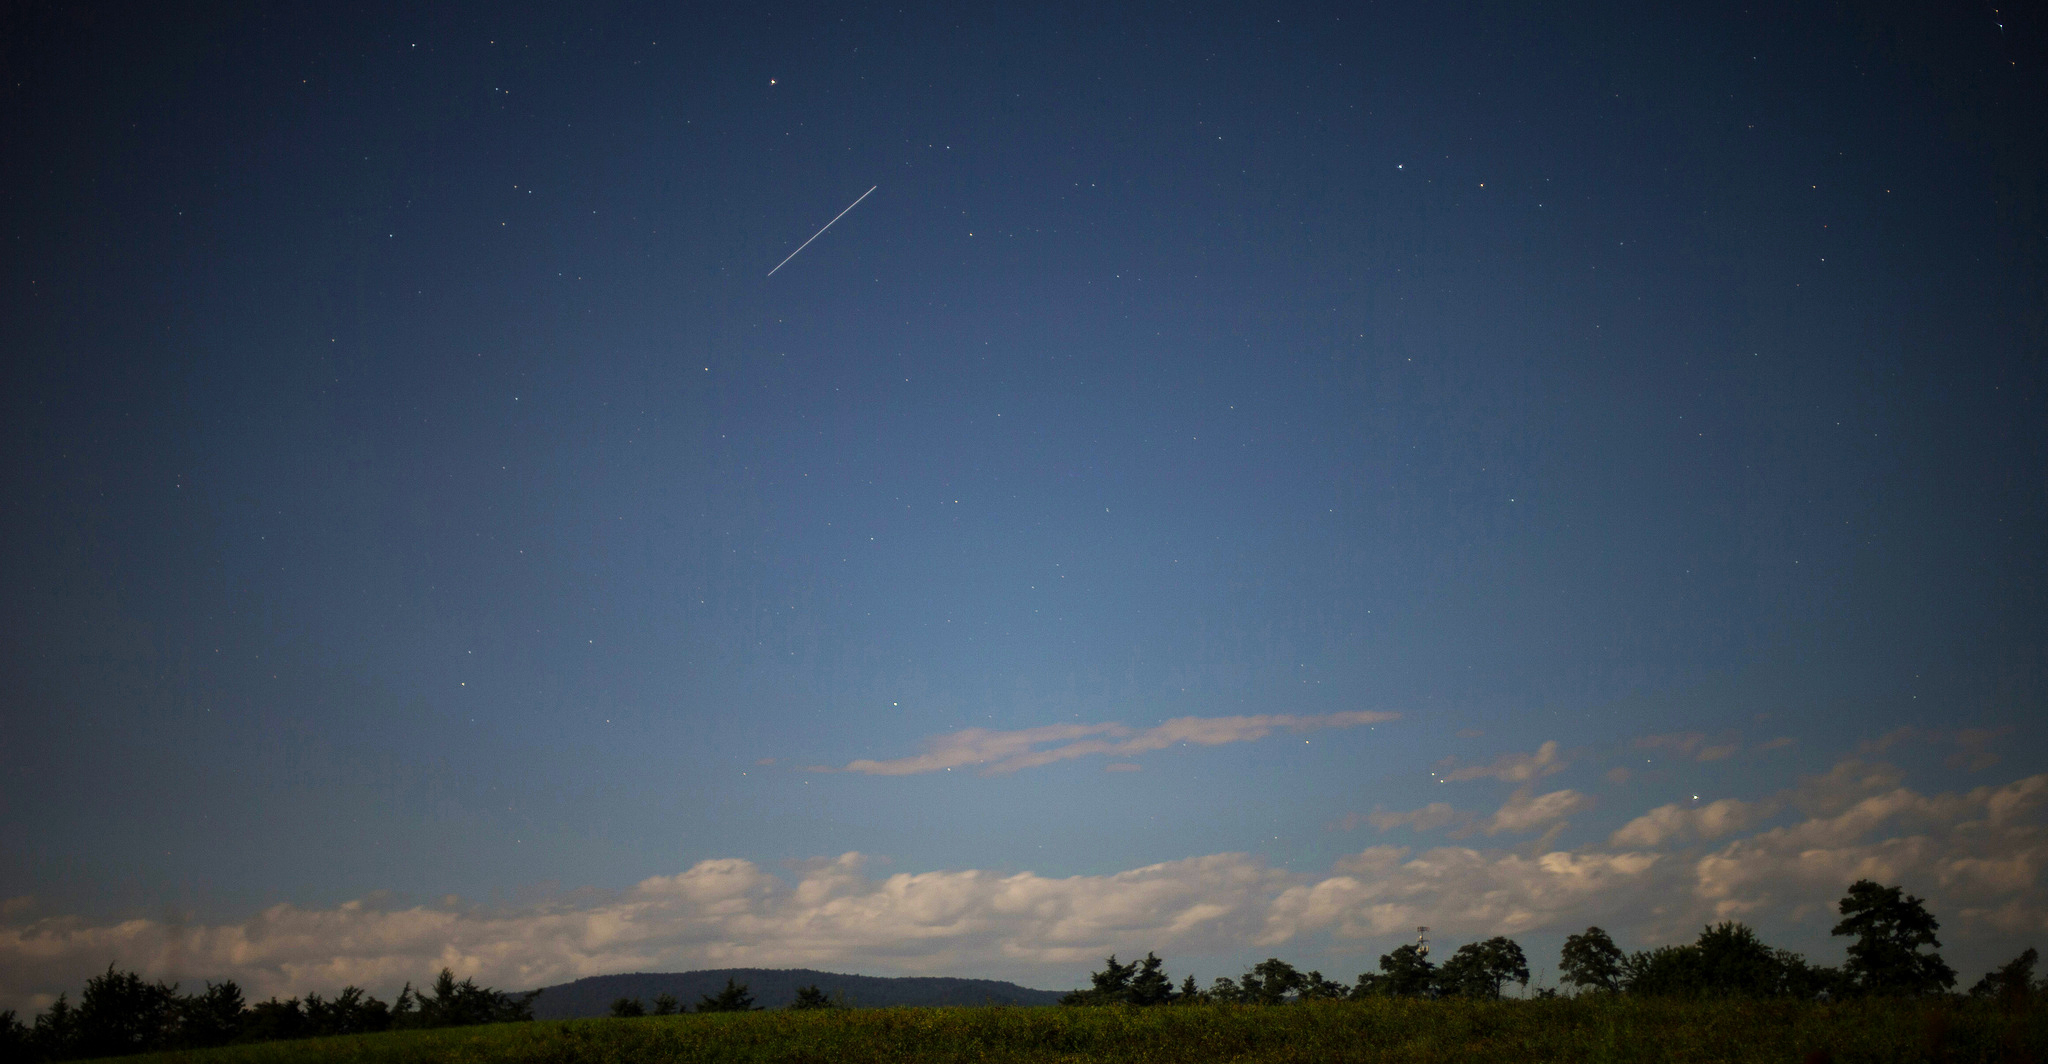 The International Space Station is seen in this 10 second exposure as it flies over Elkton, Va. early in the morning on Aug. 1, 2015.